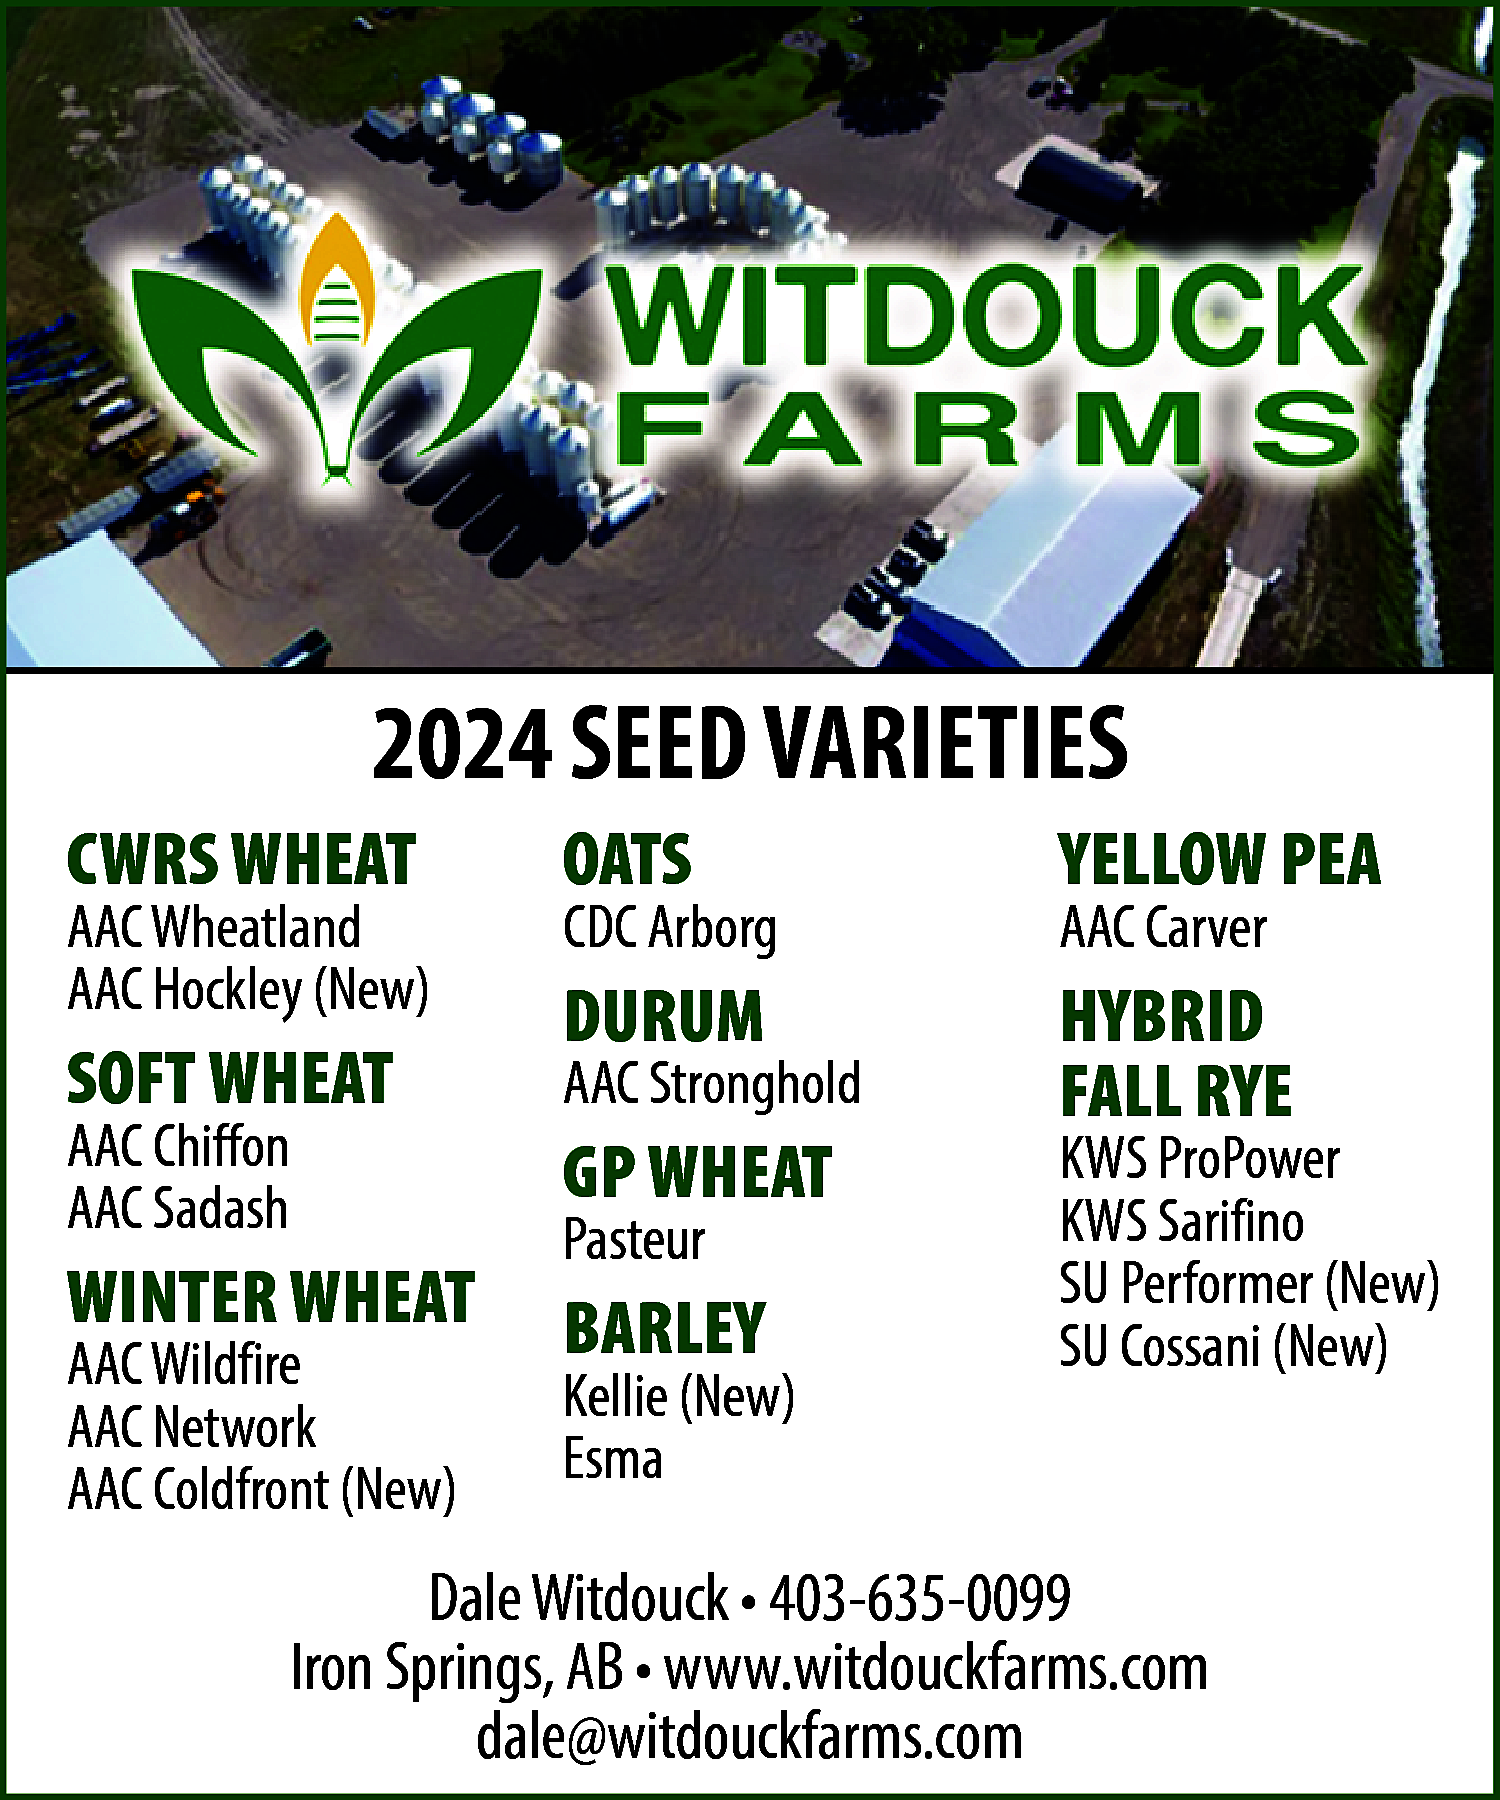 2023 <br>2024 SEED VARIETIES <br>  2023  2024 SEED VARIETIES    CWRSWHEAT  WHEAT  CWRS    AACWheatland  Wheatland (New)  AAC  AAC  Hockley  (New)  SOFT WHEAT  AAC  Chiffon  SOFT WHEAT  AACChiffon  Sadash  AAC  AAC  Sadash WHEAT  WINTER  AAC Wildfire  WINTER  WHEAT  AACWildfire  Network (New)  AAC  AAC  Network  SORGHUM  AAC  Coldfront (New)  SUDANGRASS    OATS  OATS    YELLOWPEA  PEA  YELLOW    DURUM  DURUM    HYBRID  HYBRID  FALLRYE  RYE  FALL    CDCArborg  Arborg  CDC    AACStronghold  Stronghold  AAC  AAC Goldnet (New)    GP WHEAT  GP WHEAT  Pasteur  Pasteur  BARLEY  BARLEY  Kellie  (New)  Kellie (New)  Esma  Esma    AACCarver  Carver  AAC    ProPower  KWS  ProPower  Sarifino  KWS  Sarifino  SUFLAX  Performer (New)  SUDorado  Cossani (New)  (Yellow)    Dale Witdouck • 403-635-0099  Iron Springs, AB • www.witdouckfarms.com  dale@witdouckfarms.com    